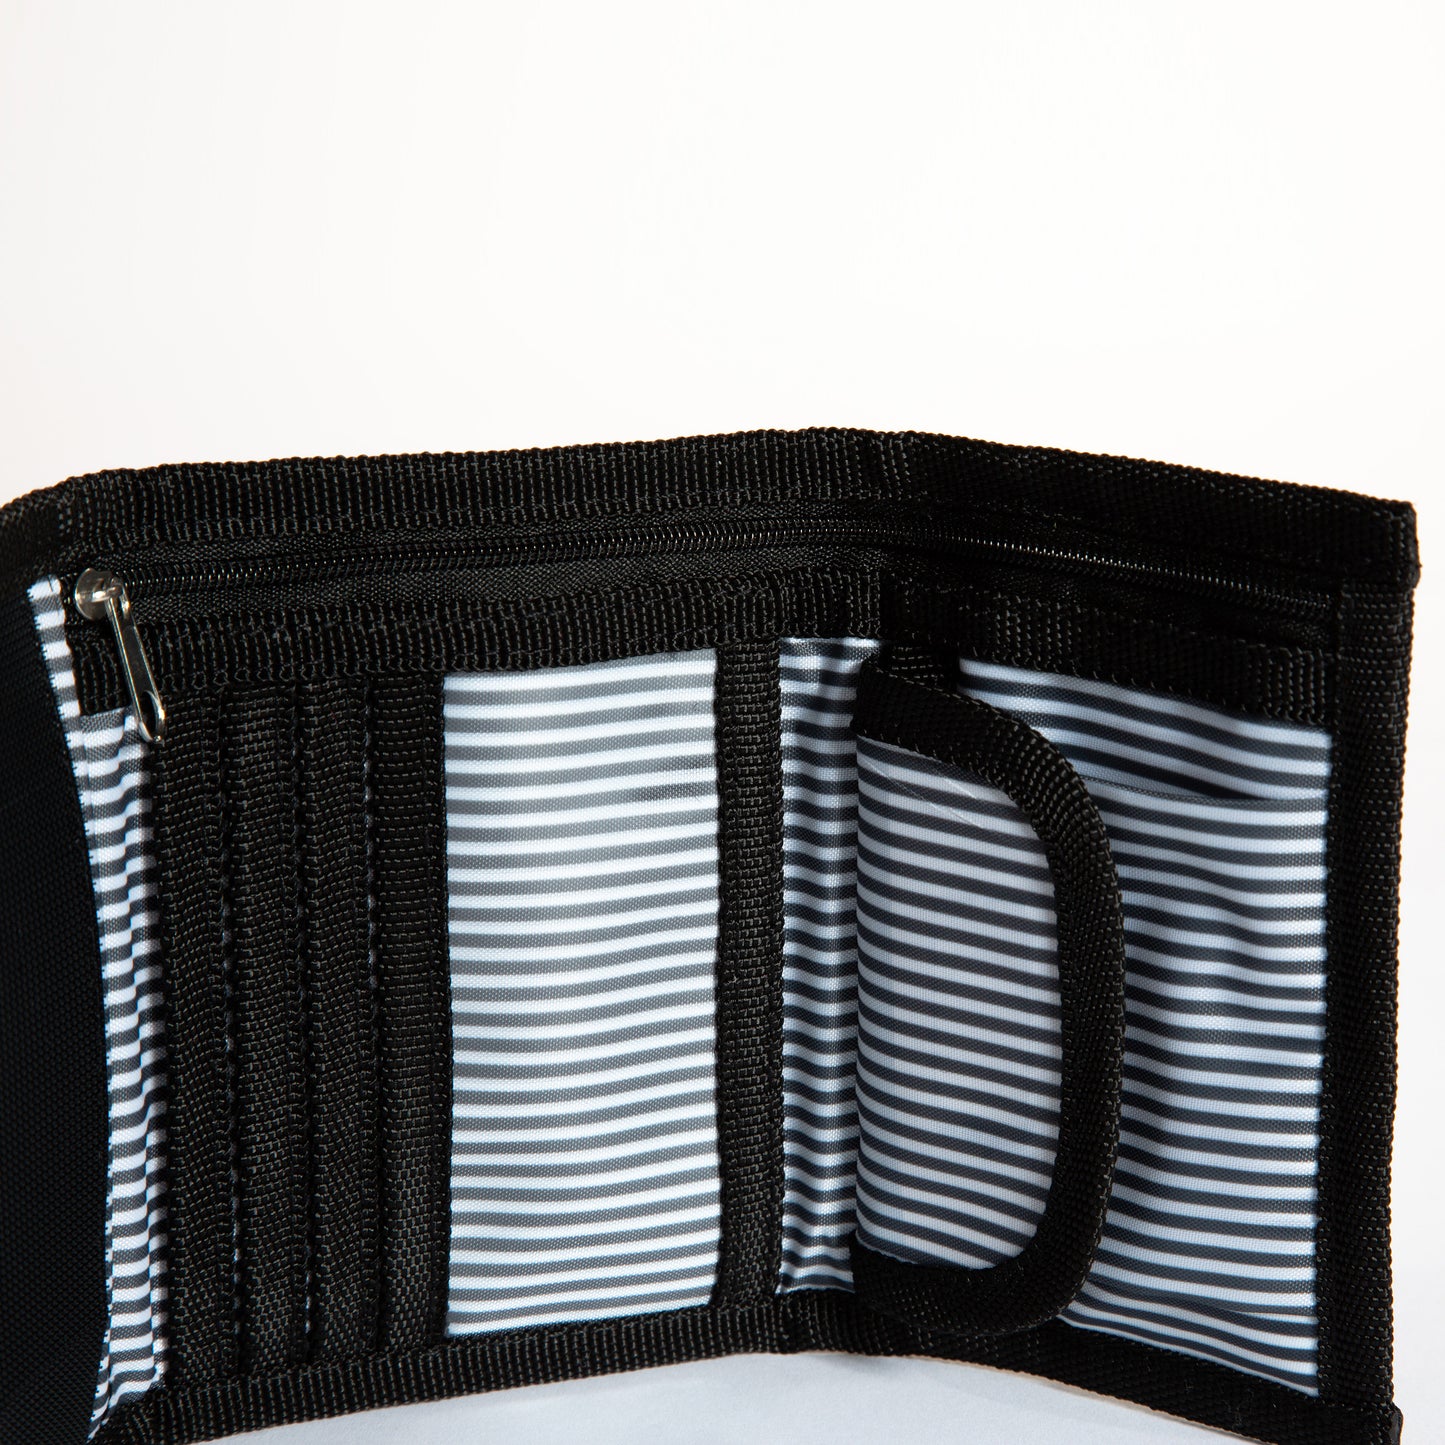 Inside of matt black velcro wallet with zip compartments Goodordering with coin compartment